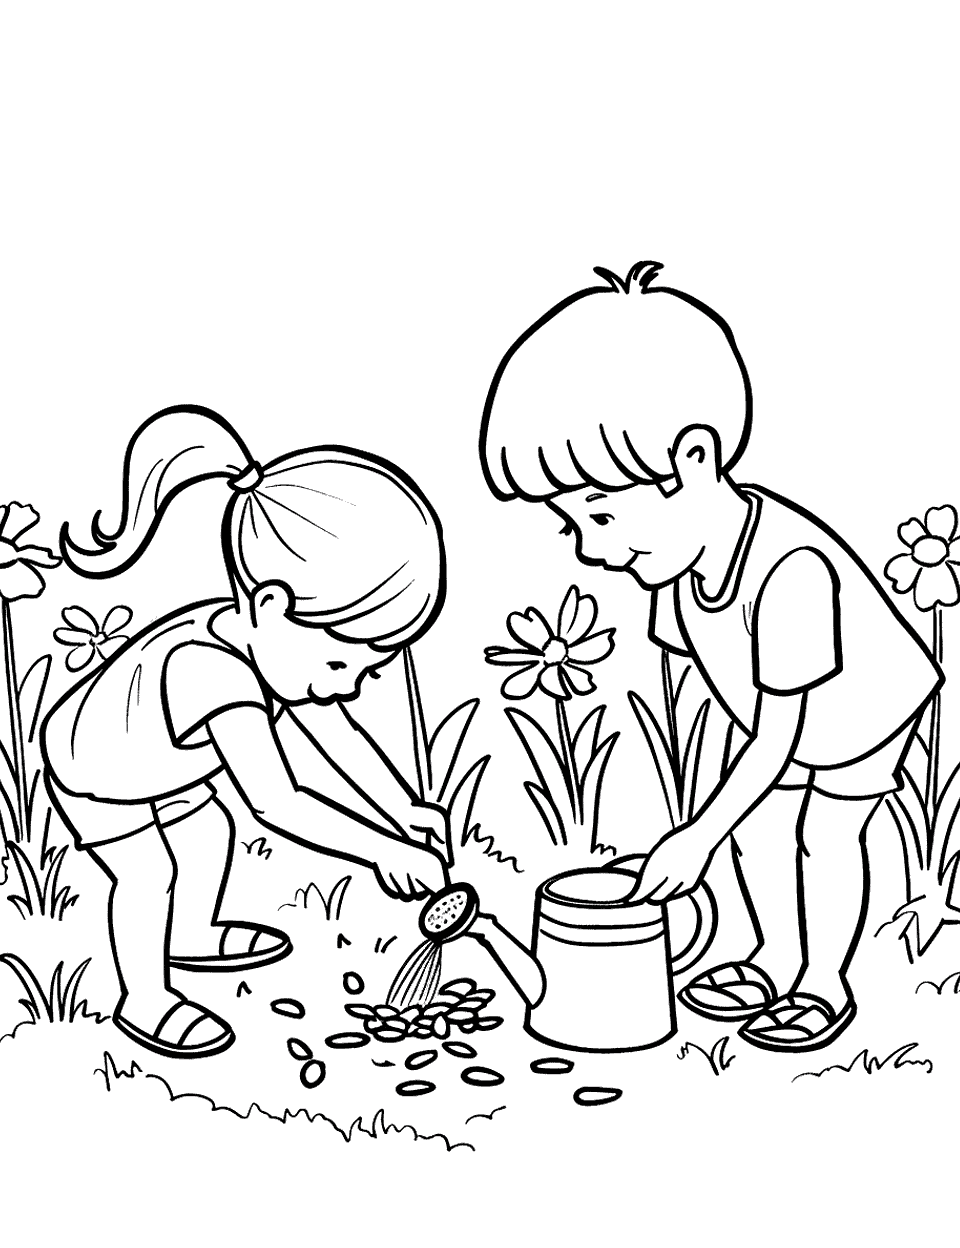 Children Planting Seeds Garden Coloring Page - Two children planting seeds in their backyard garden, with a watering can.